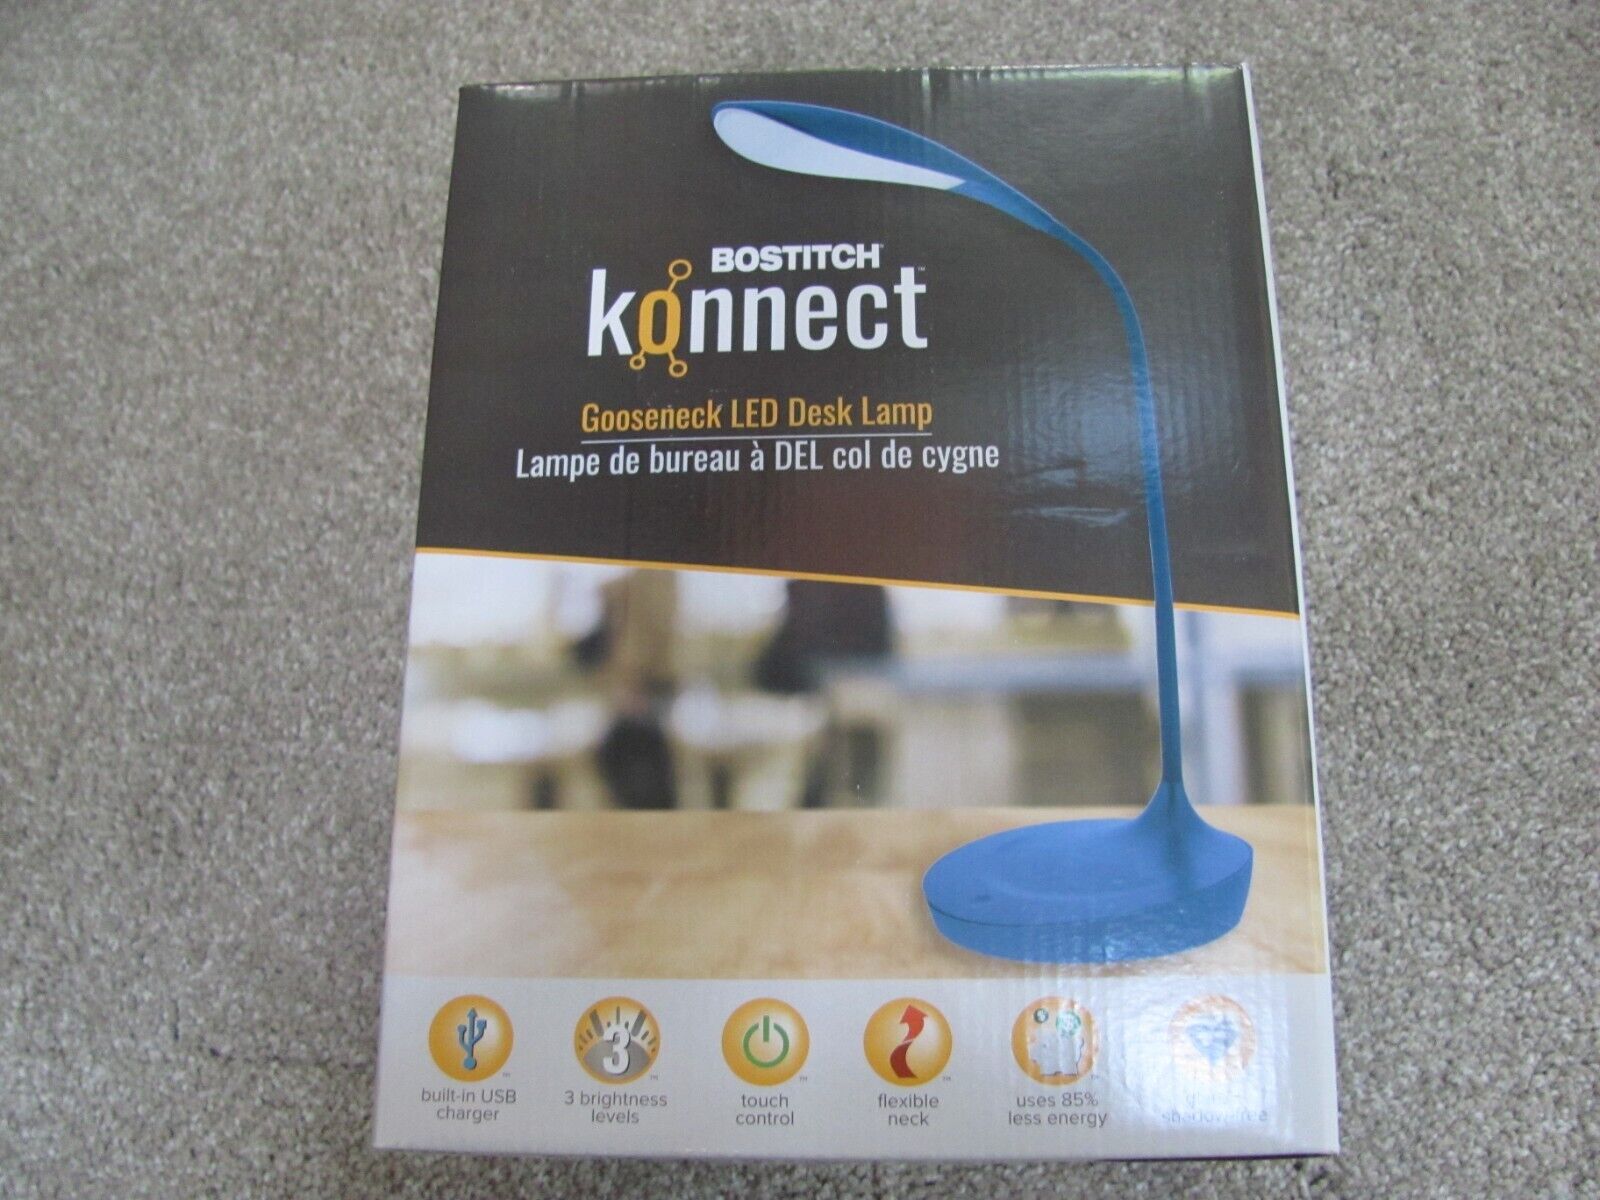 New Bostitch Konnect Gooseneck LED Desk Lamp with Built-In USB Charger Blue